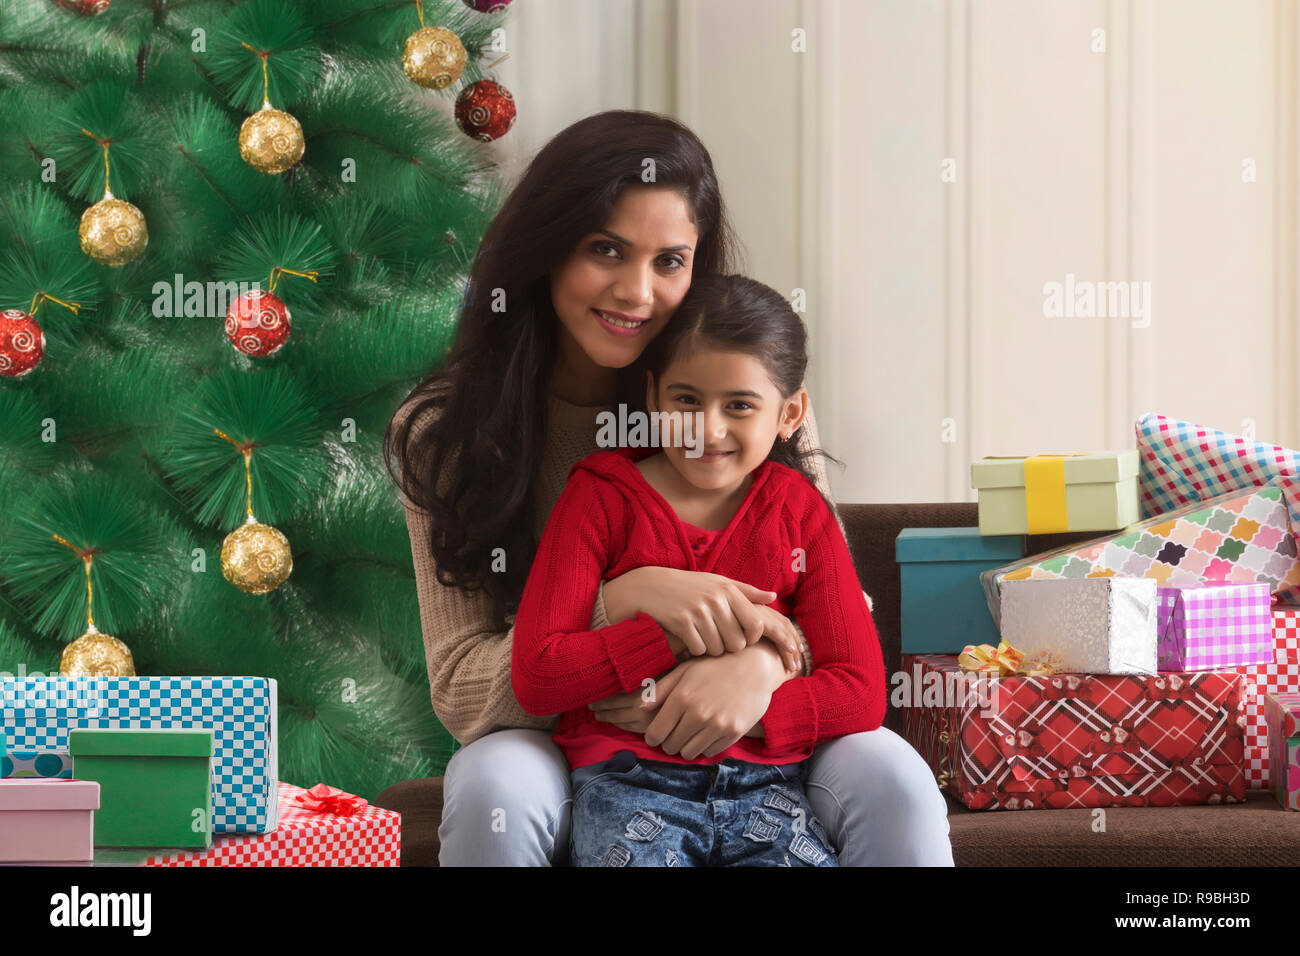 Mother and daughter with Christmas gifts Stock Photo